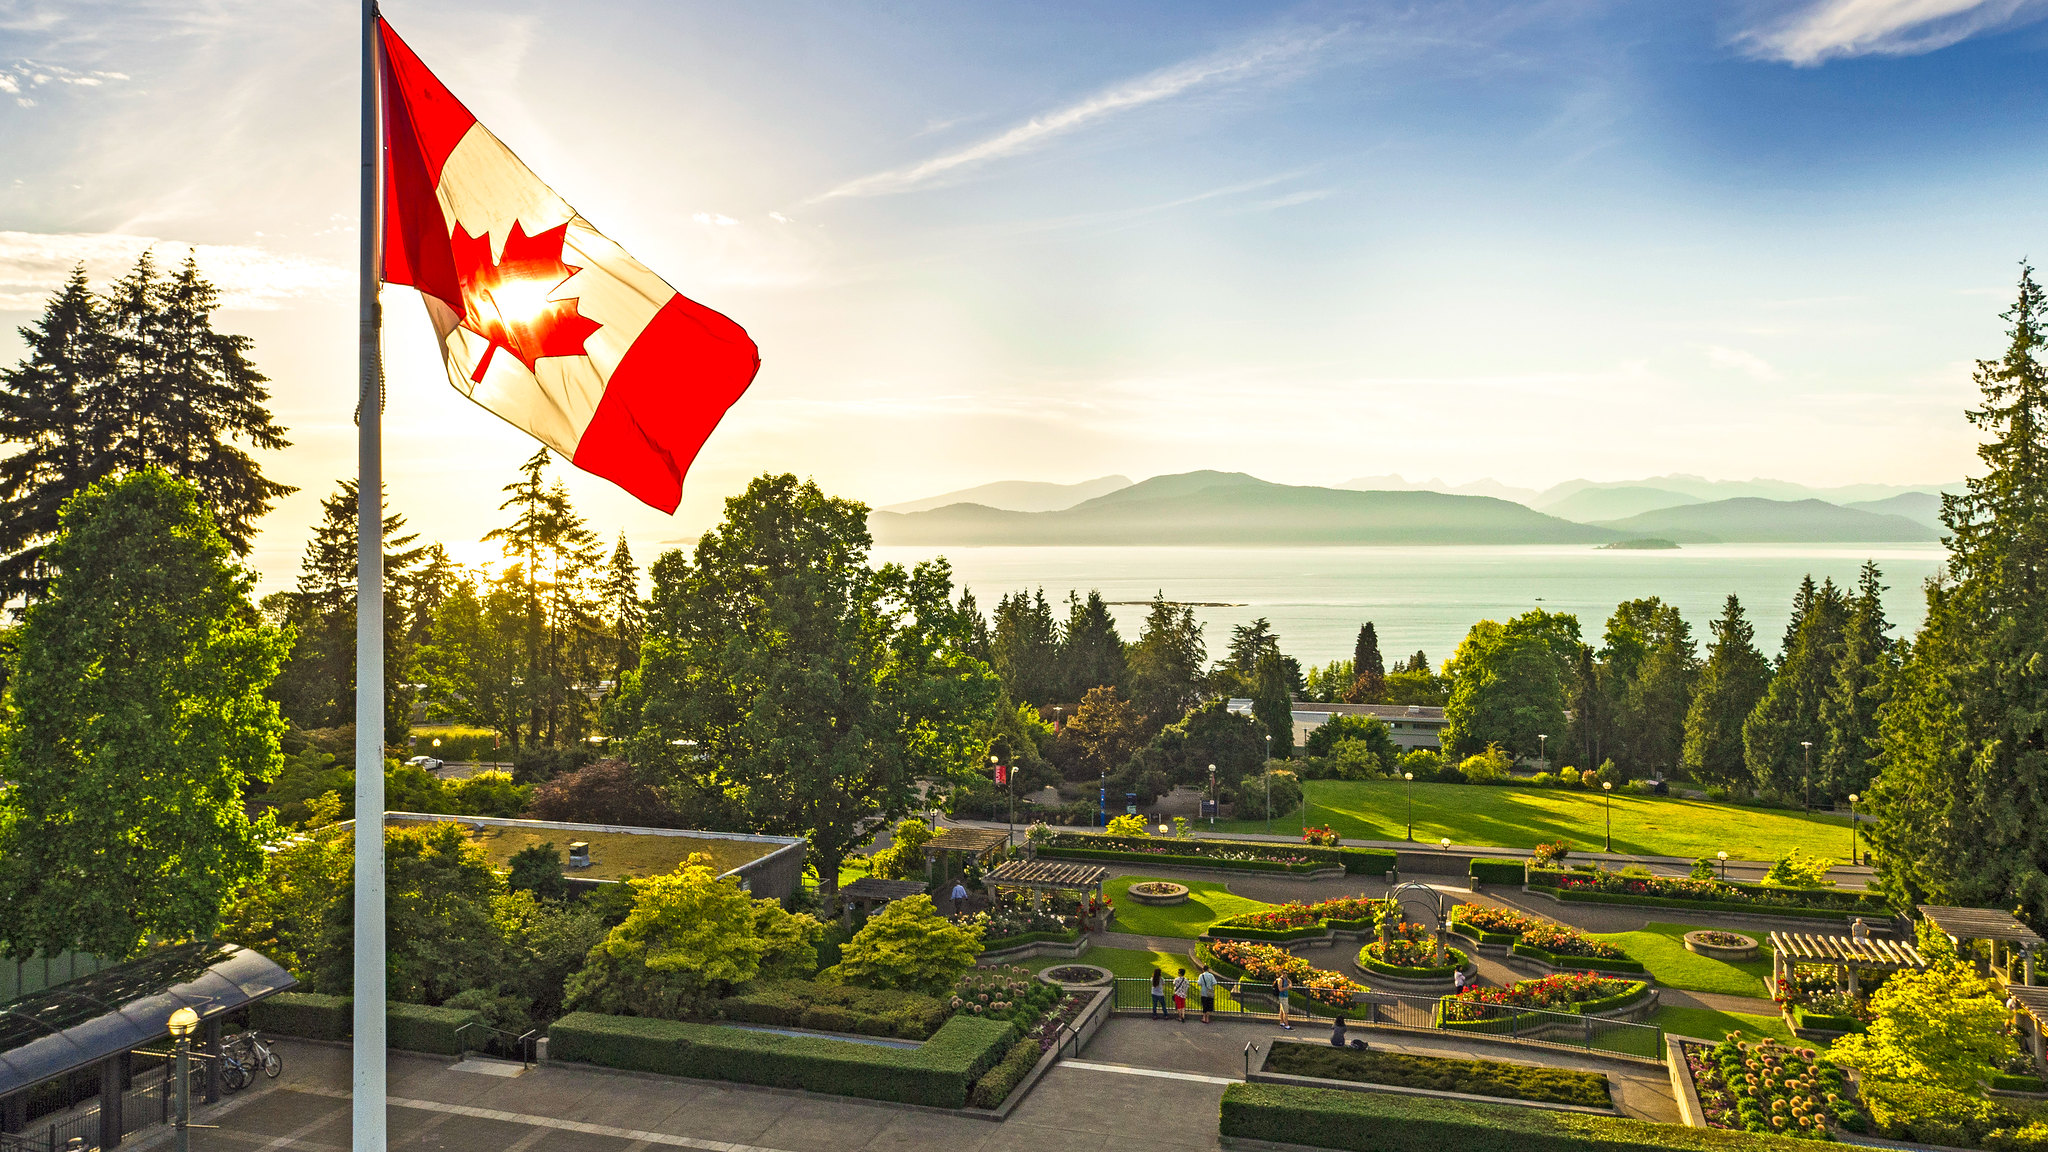 A picture of the UBC Rose Garden, with the Canadian flag in the foreground.